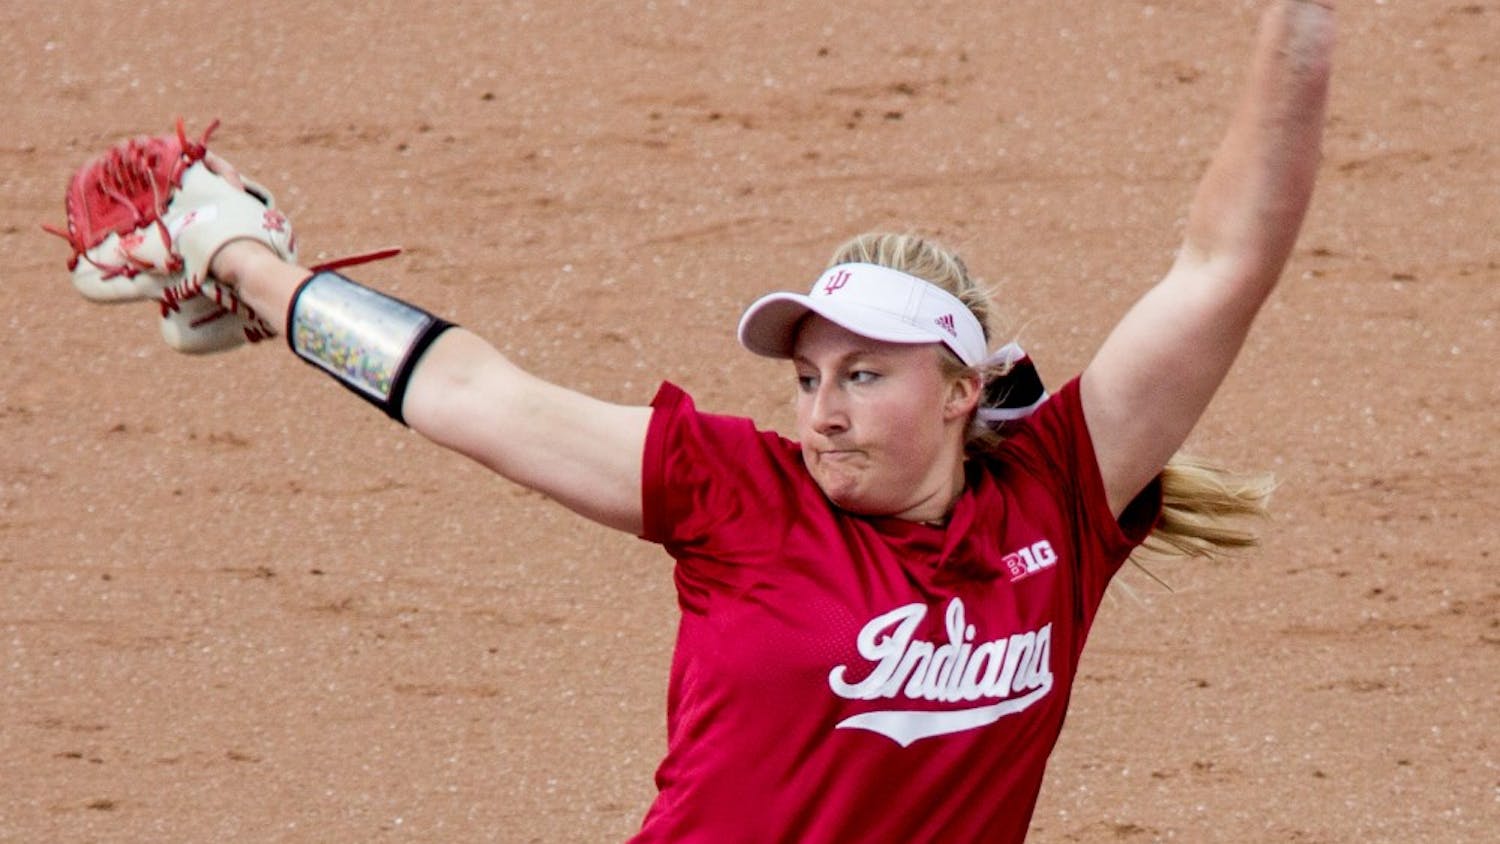 Then-freshman pitcher Josie Wood throws a pitch during a 2016 game against Indiana State University at Andy Mohr Field. Now a redshirt sophomore, Wood threw pitches during IU's fall season after missing all of the 2017 season with an injury.